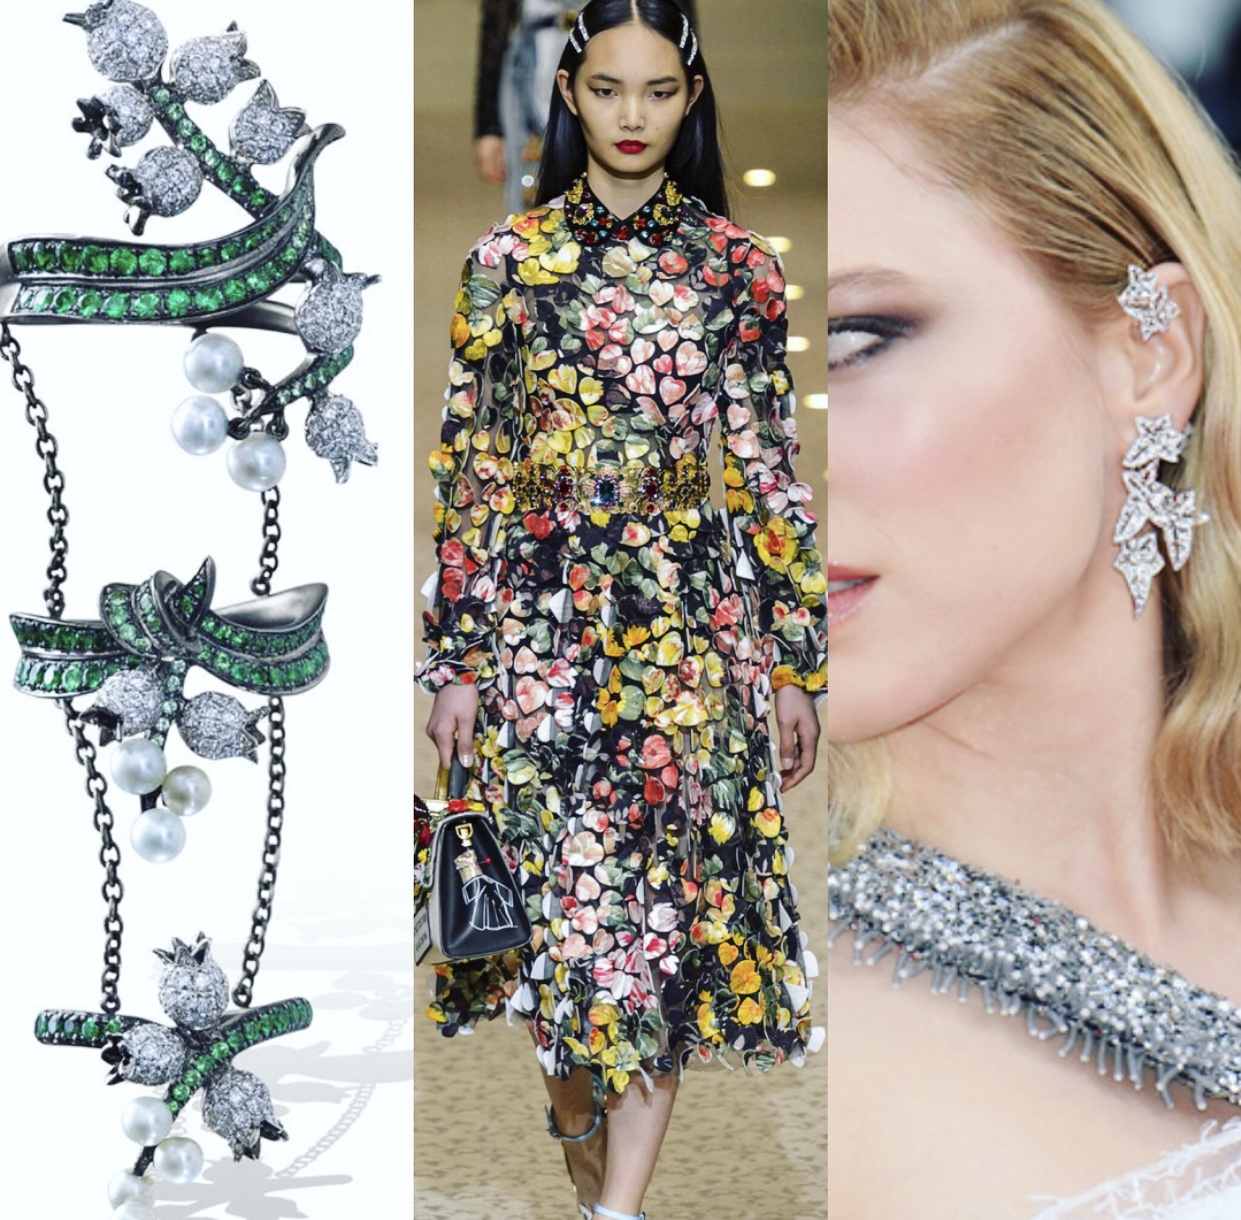 Designers Continue to Cultivate Floral Motifs - Bejeweled